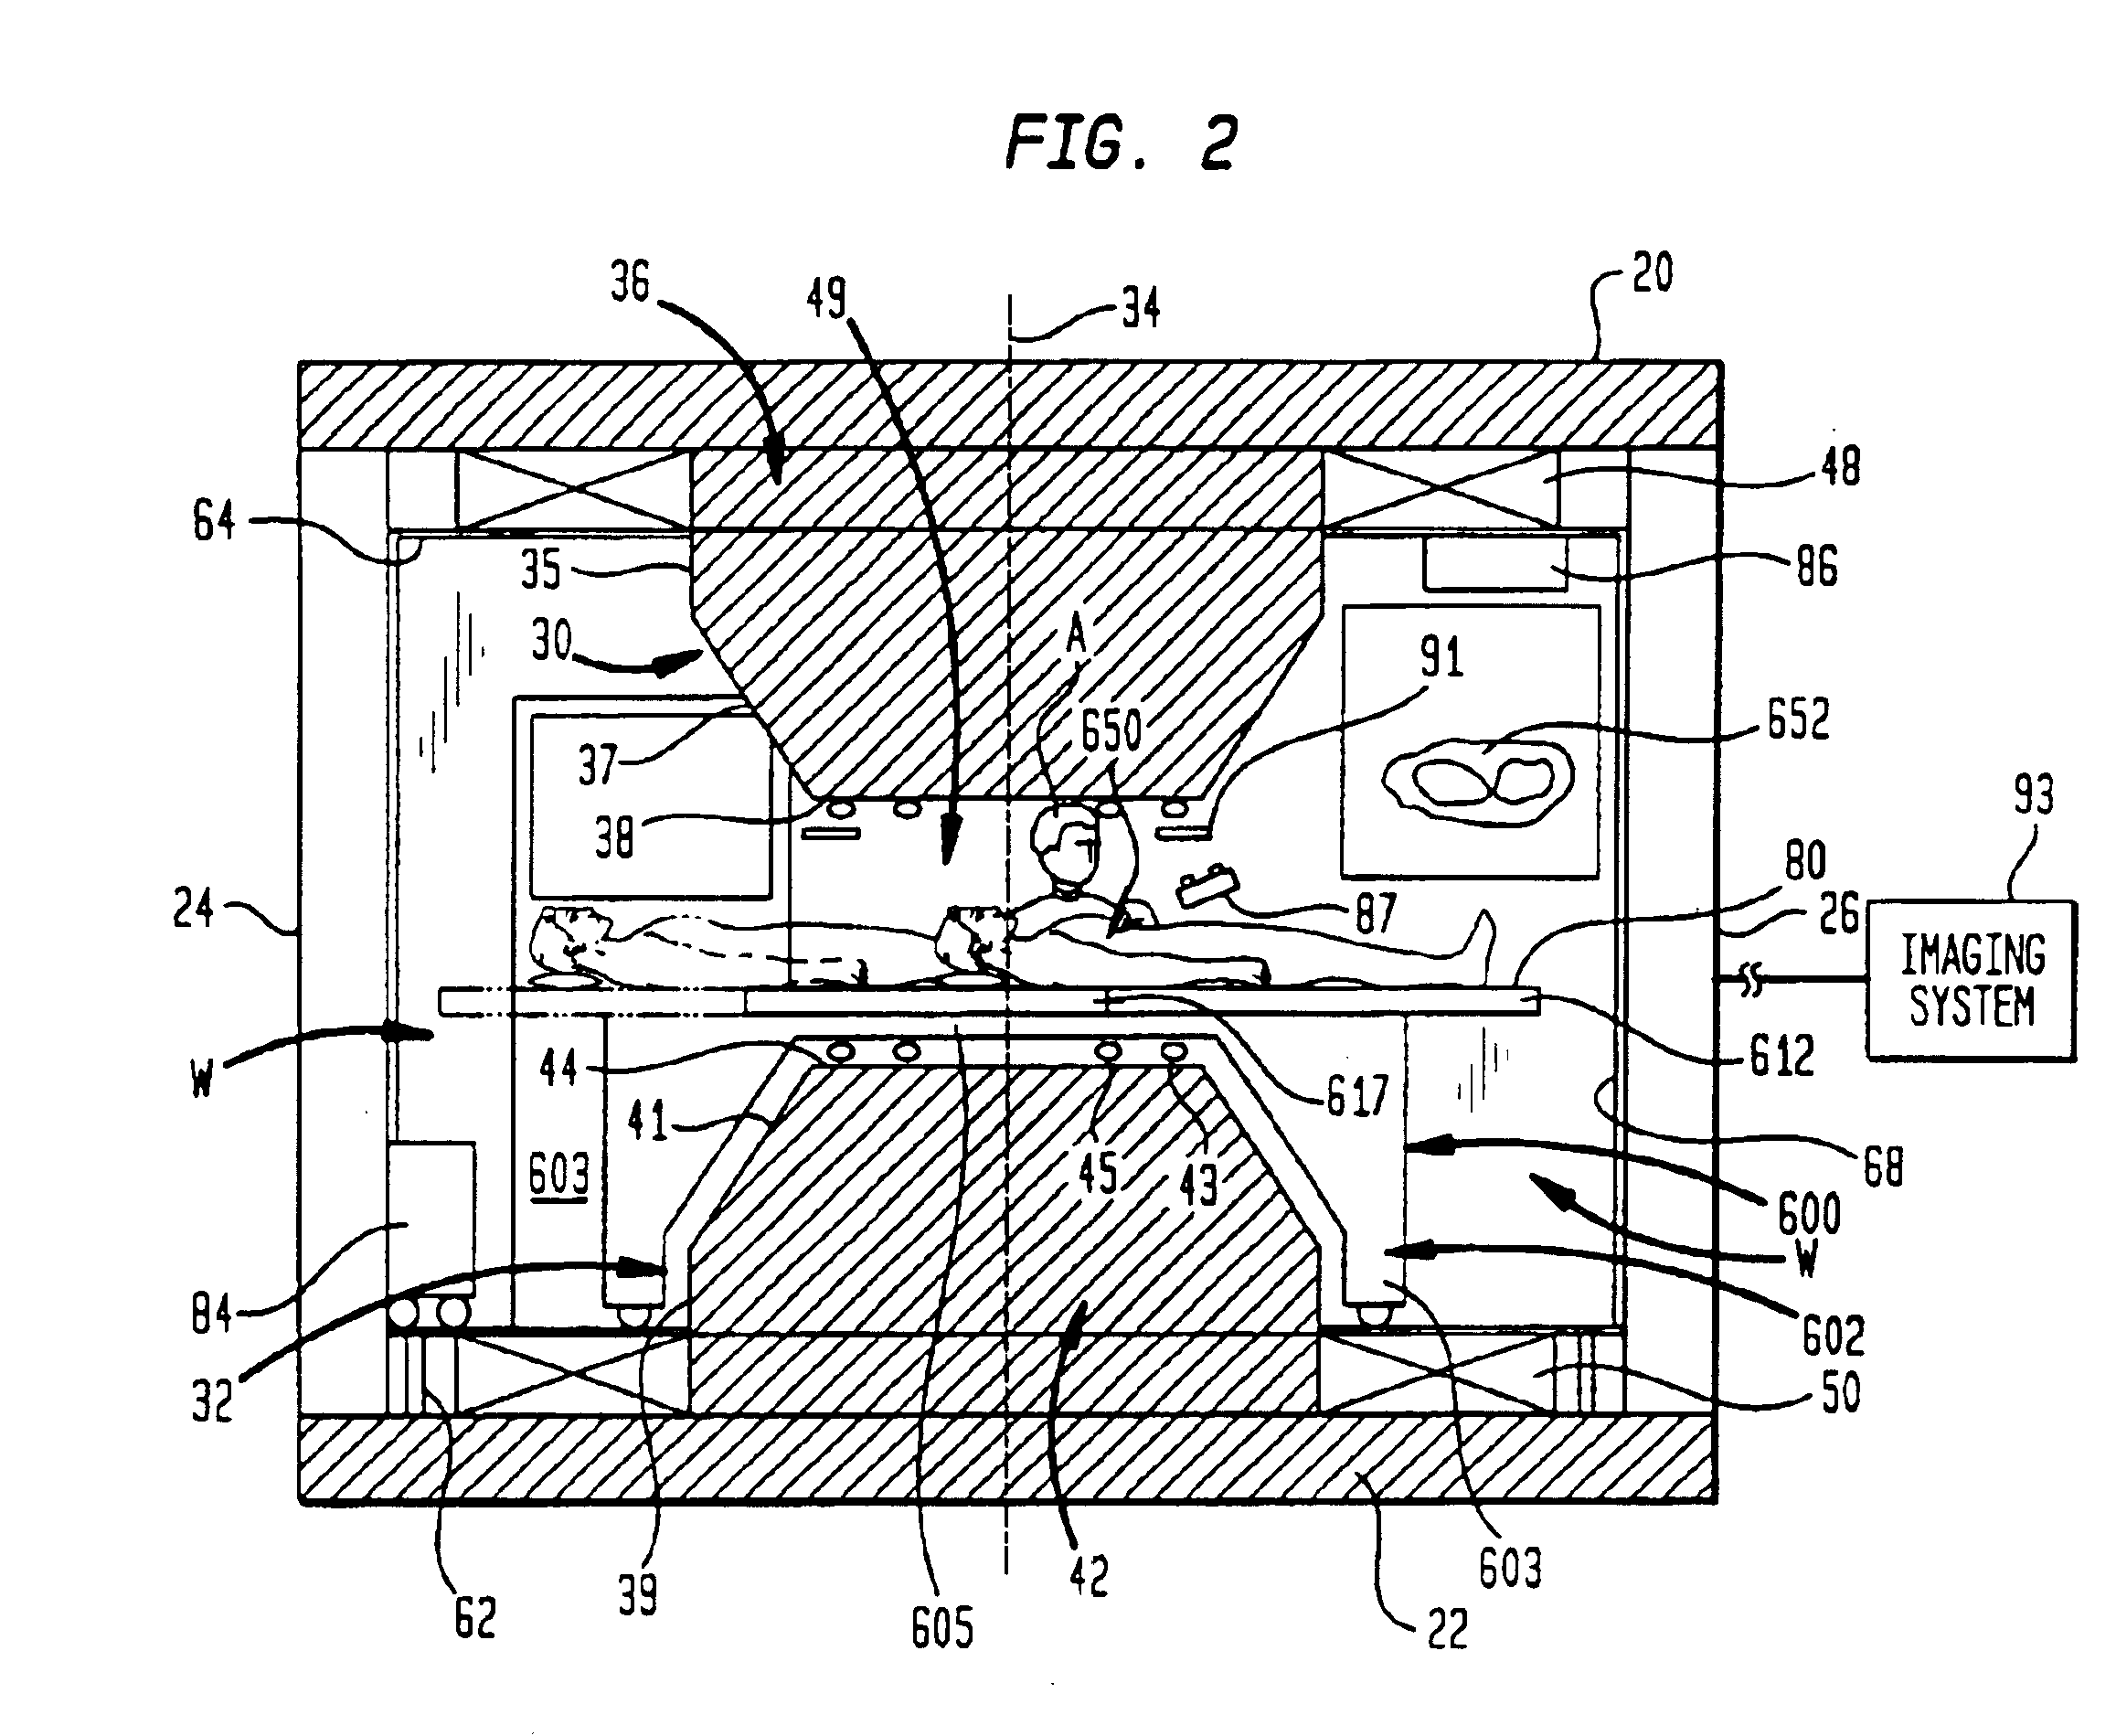 Method for fabricating a ferromagnetic plate